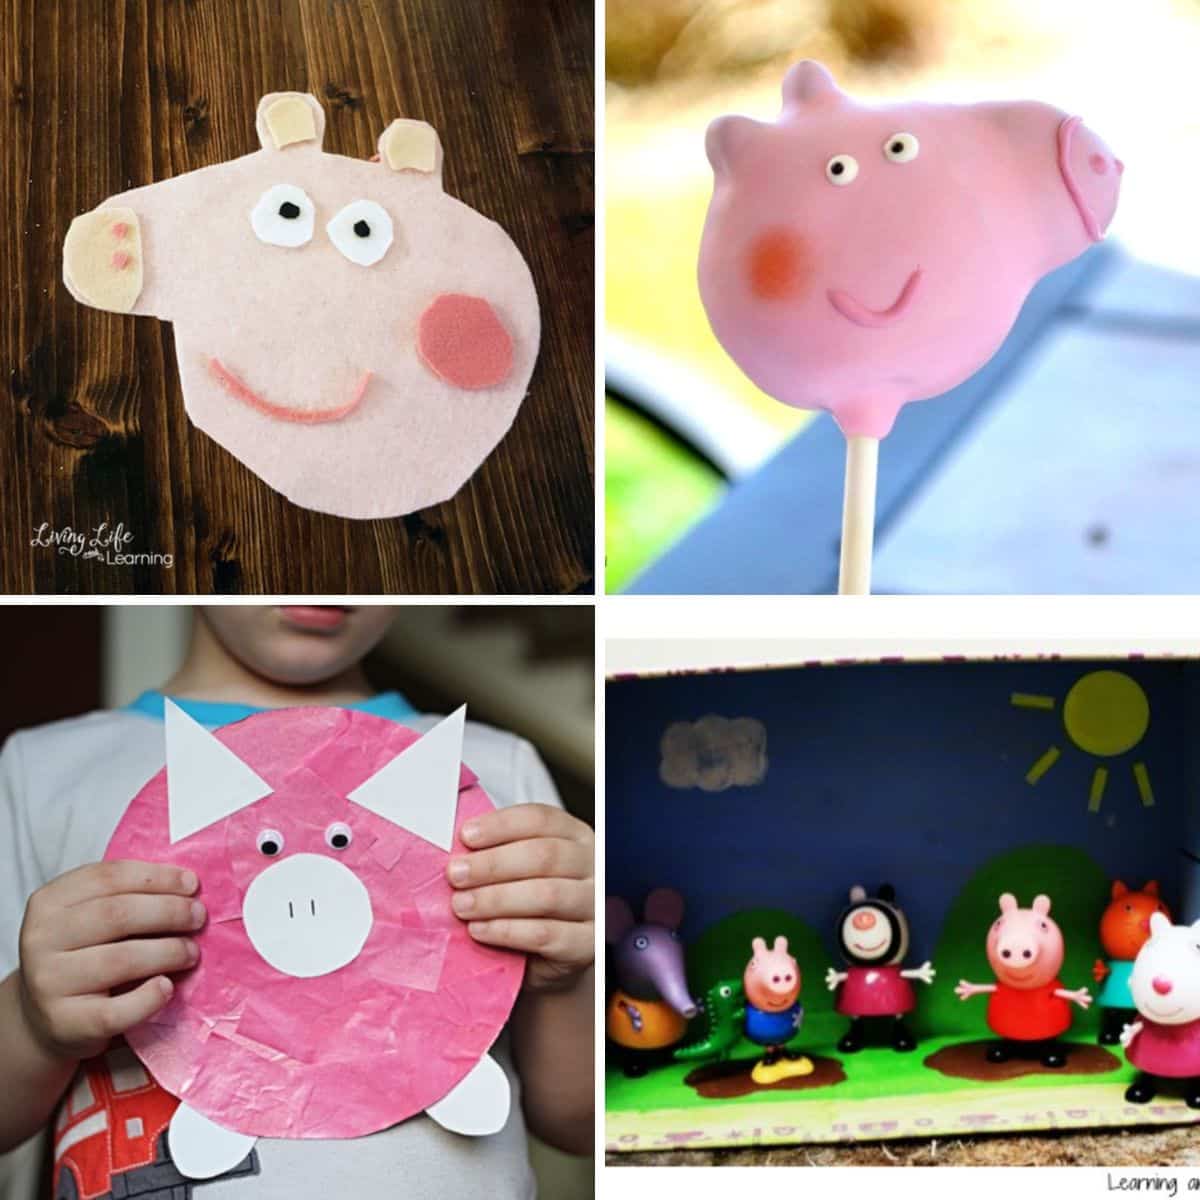 4 images of peppa pig ispired ideas for kids.